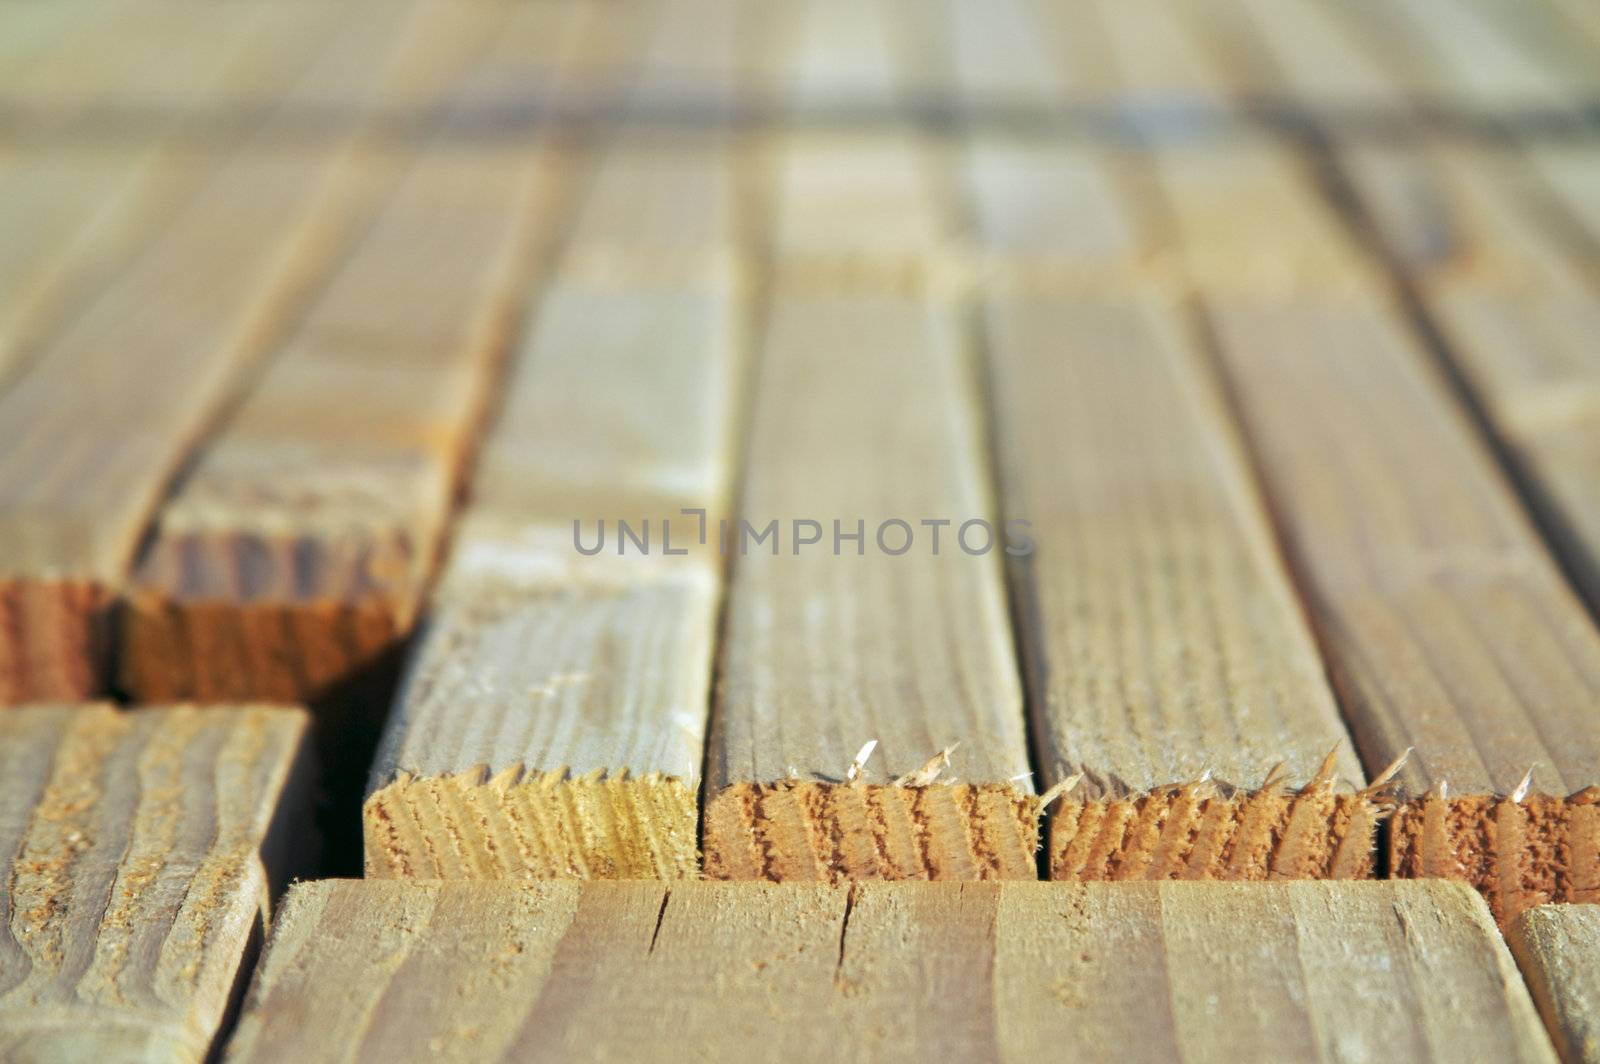 Stack of Construction Wood by Feverpitched